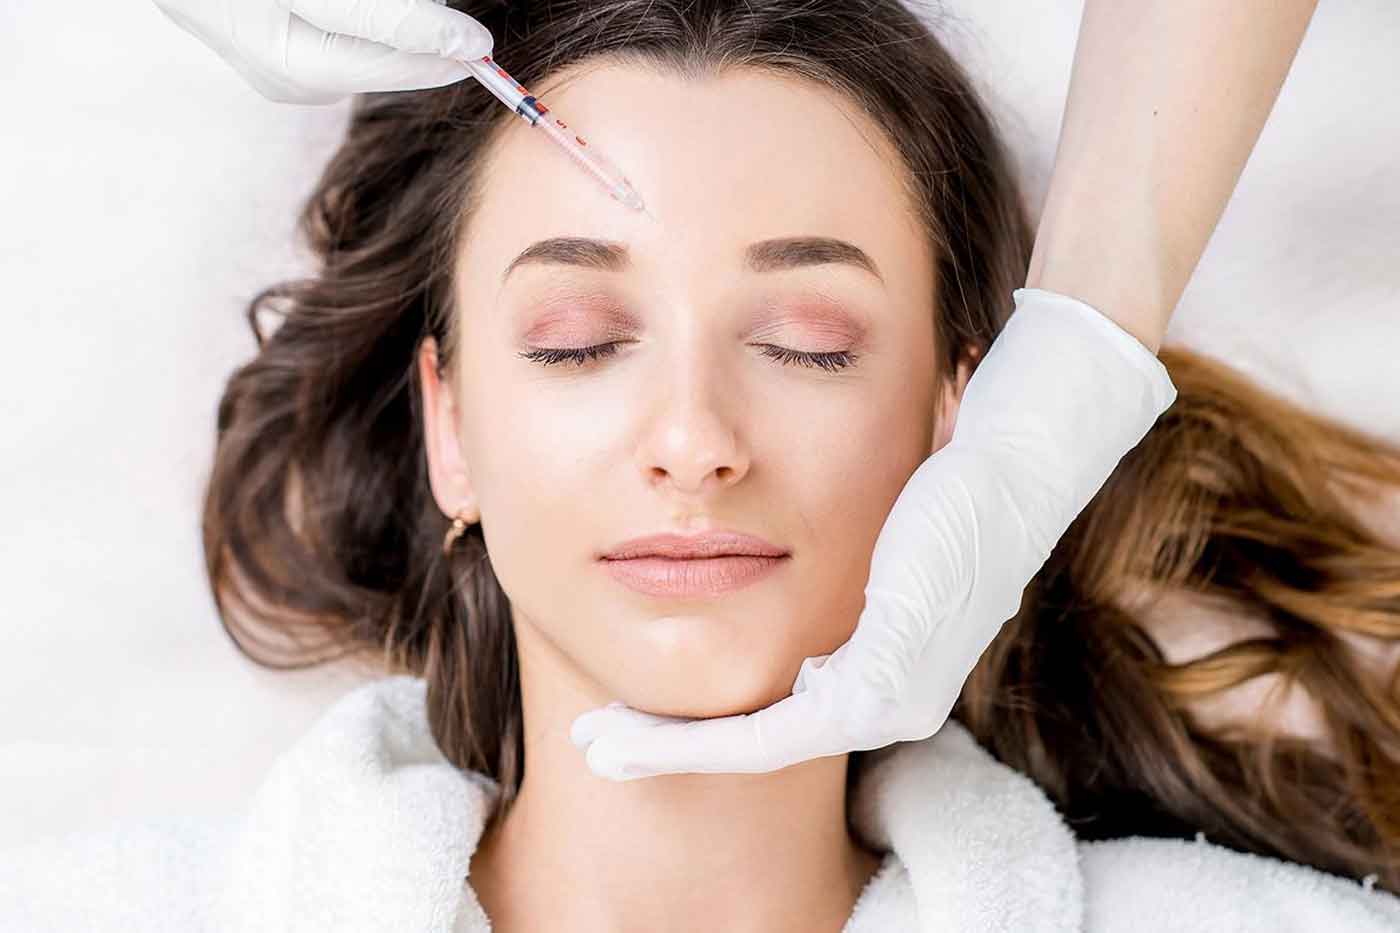 Experts: Salons should not carry out cosmetic surgeries